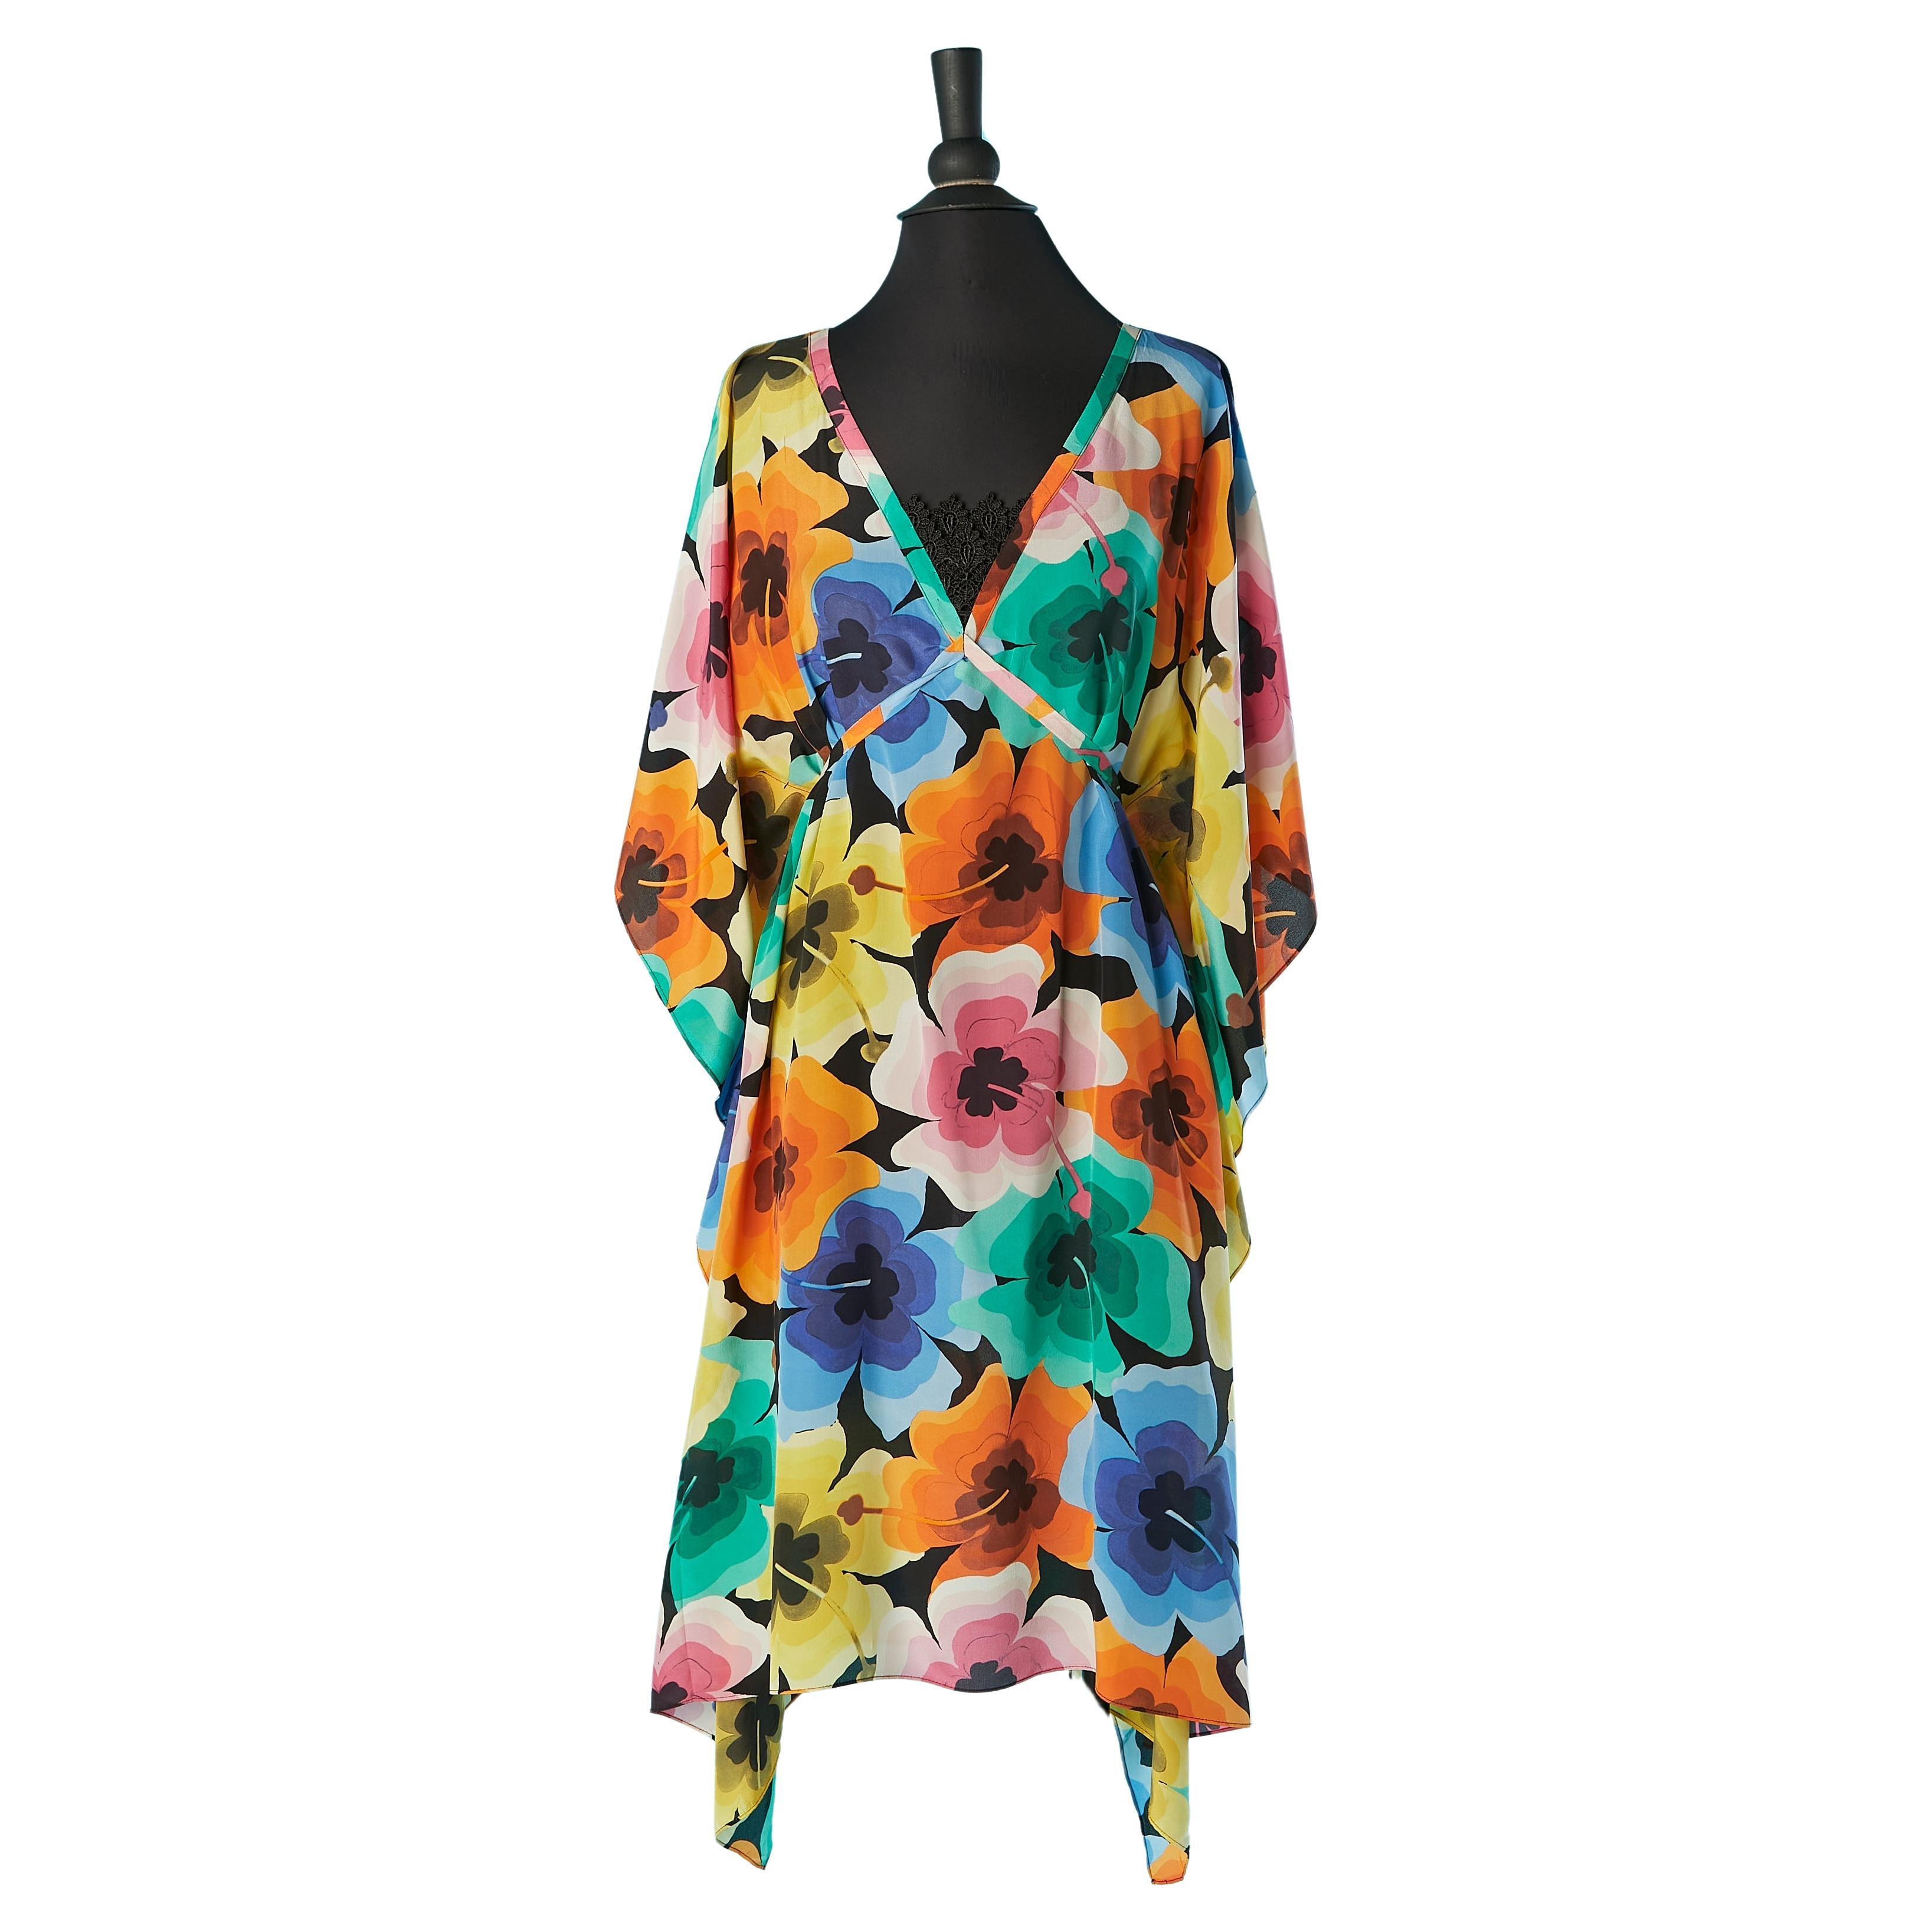 Poncho-dress with multicolor flower print and black lace details LOVE MOSCHINO  For Sale